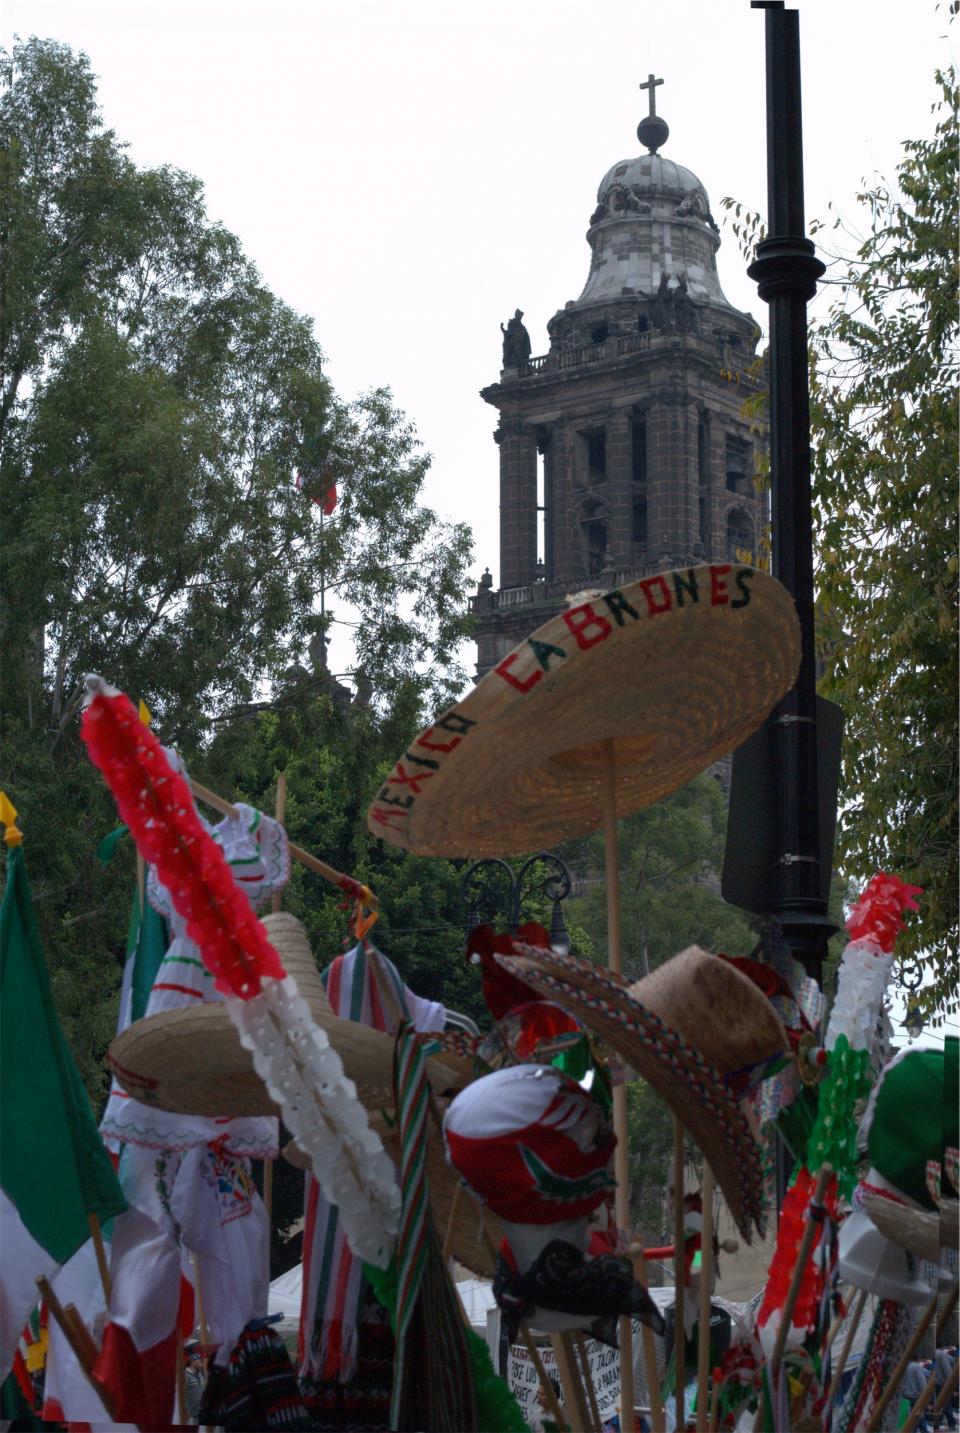 sombrero protest people mexico Mexicans flags crowd 